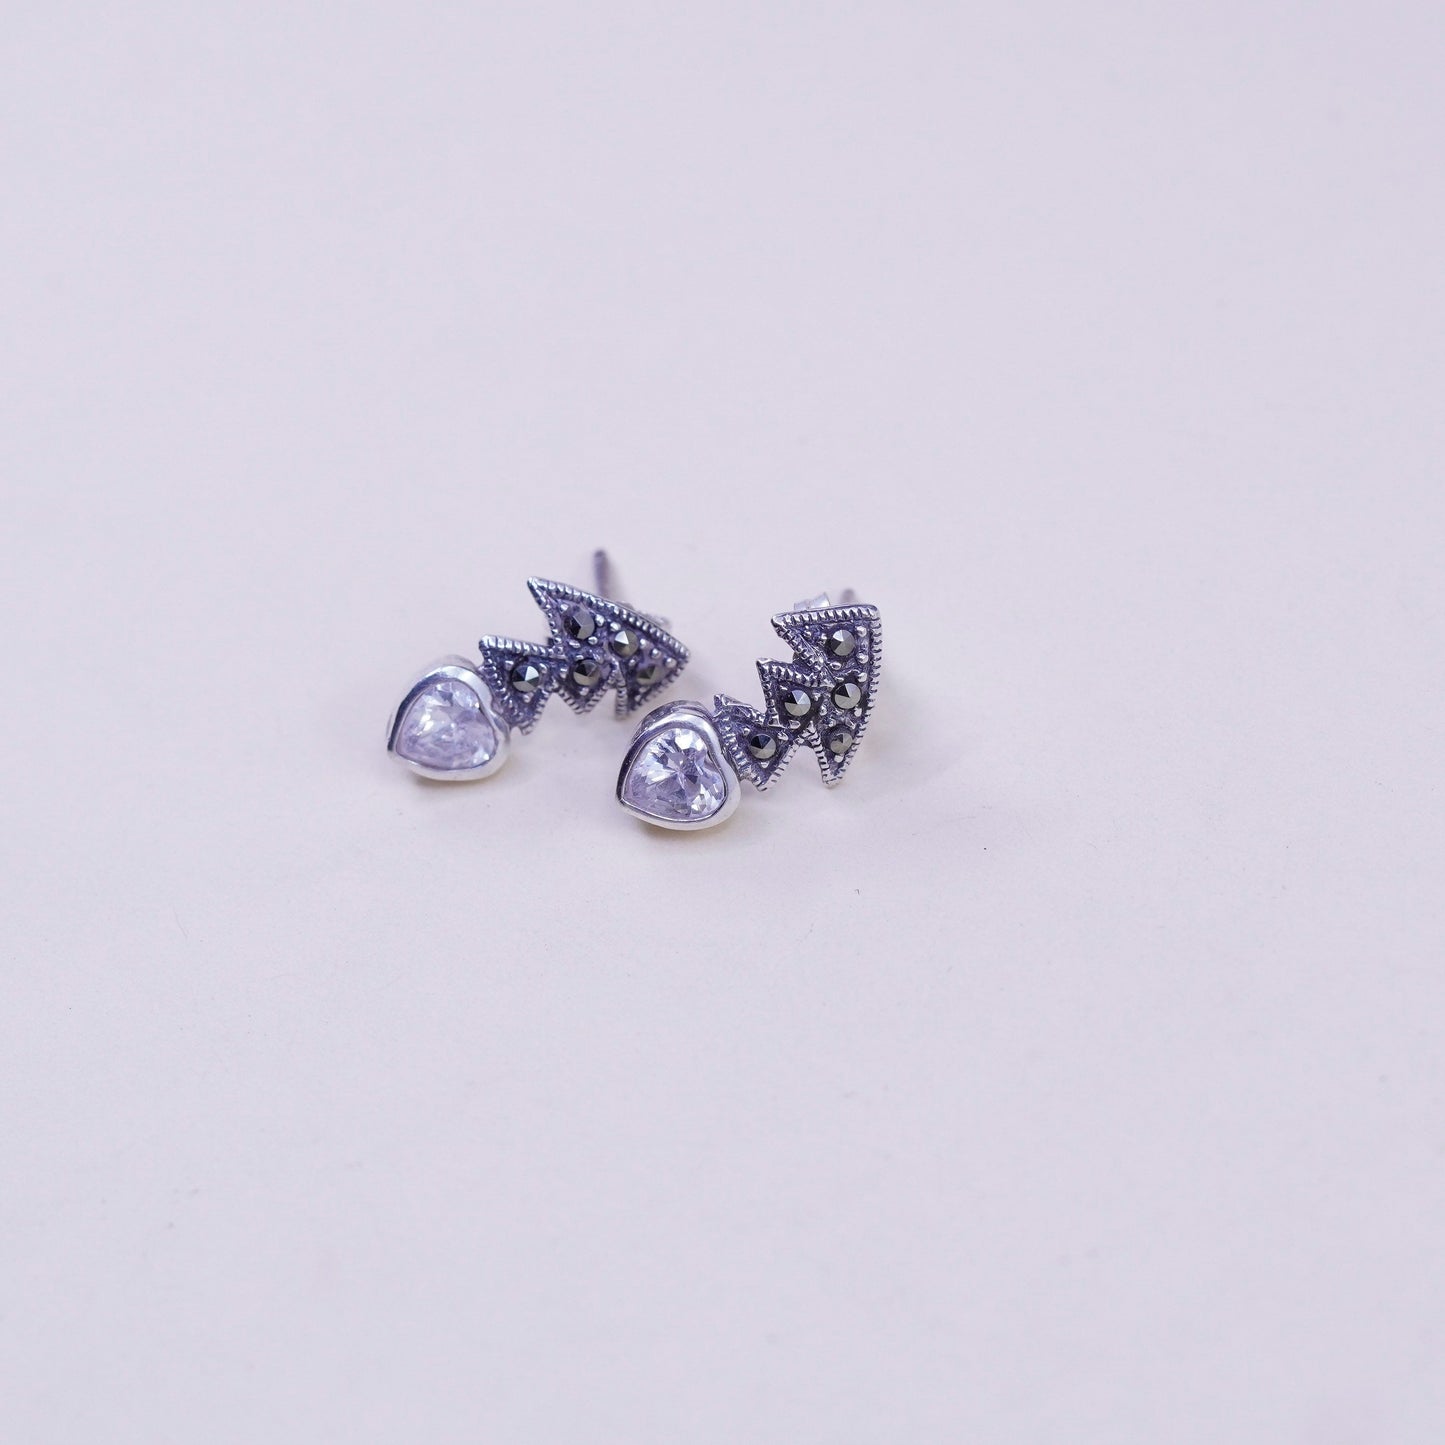 Vintage sterling 925 silver genuine cz studs, minimalist earrings and marcasite